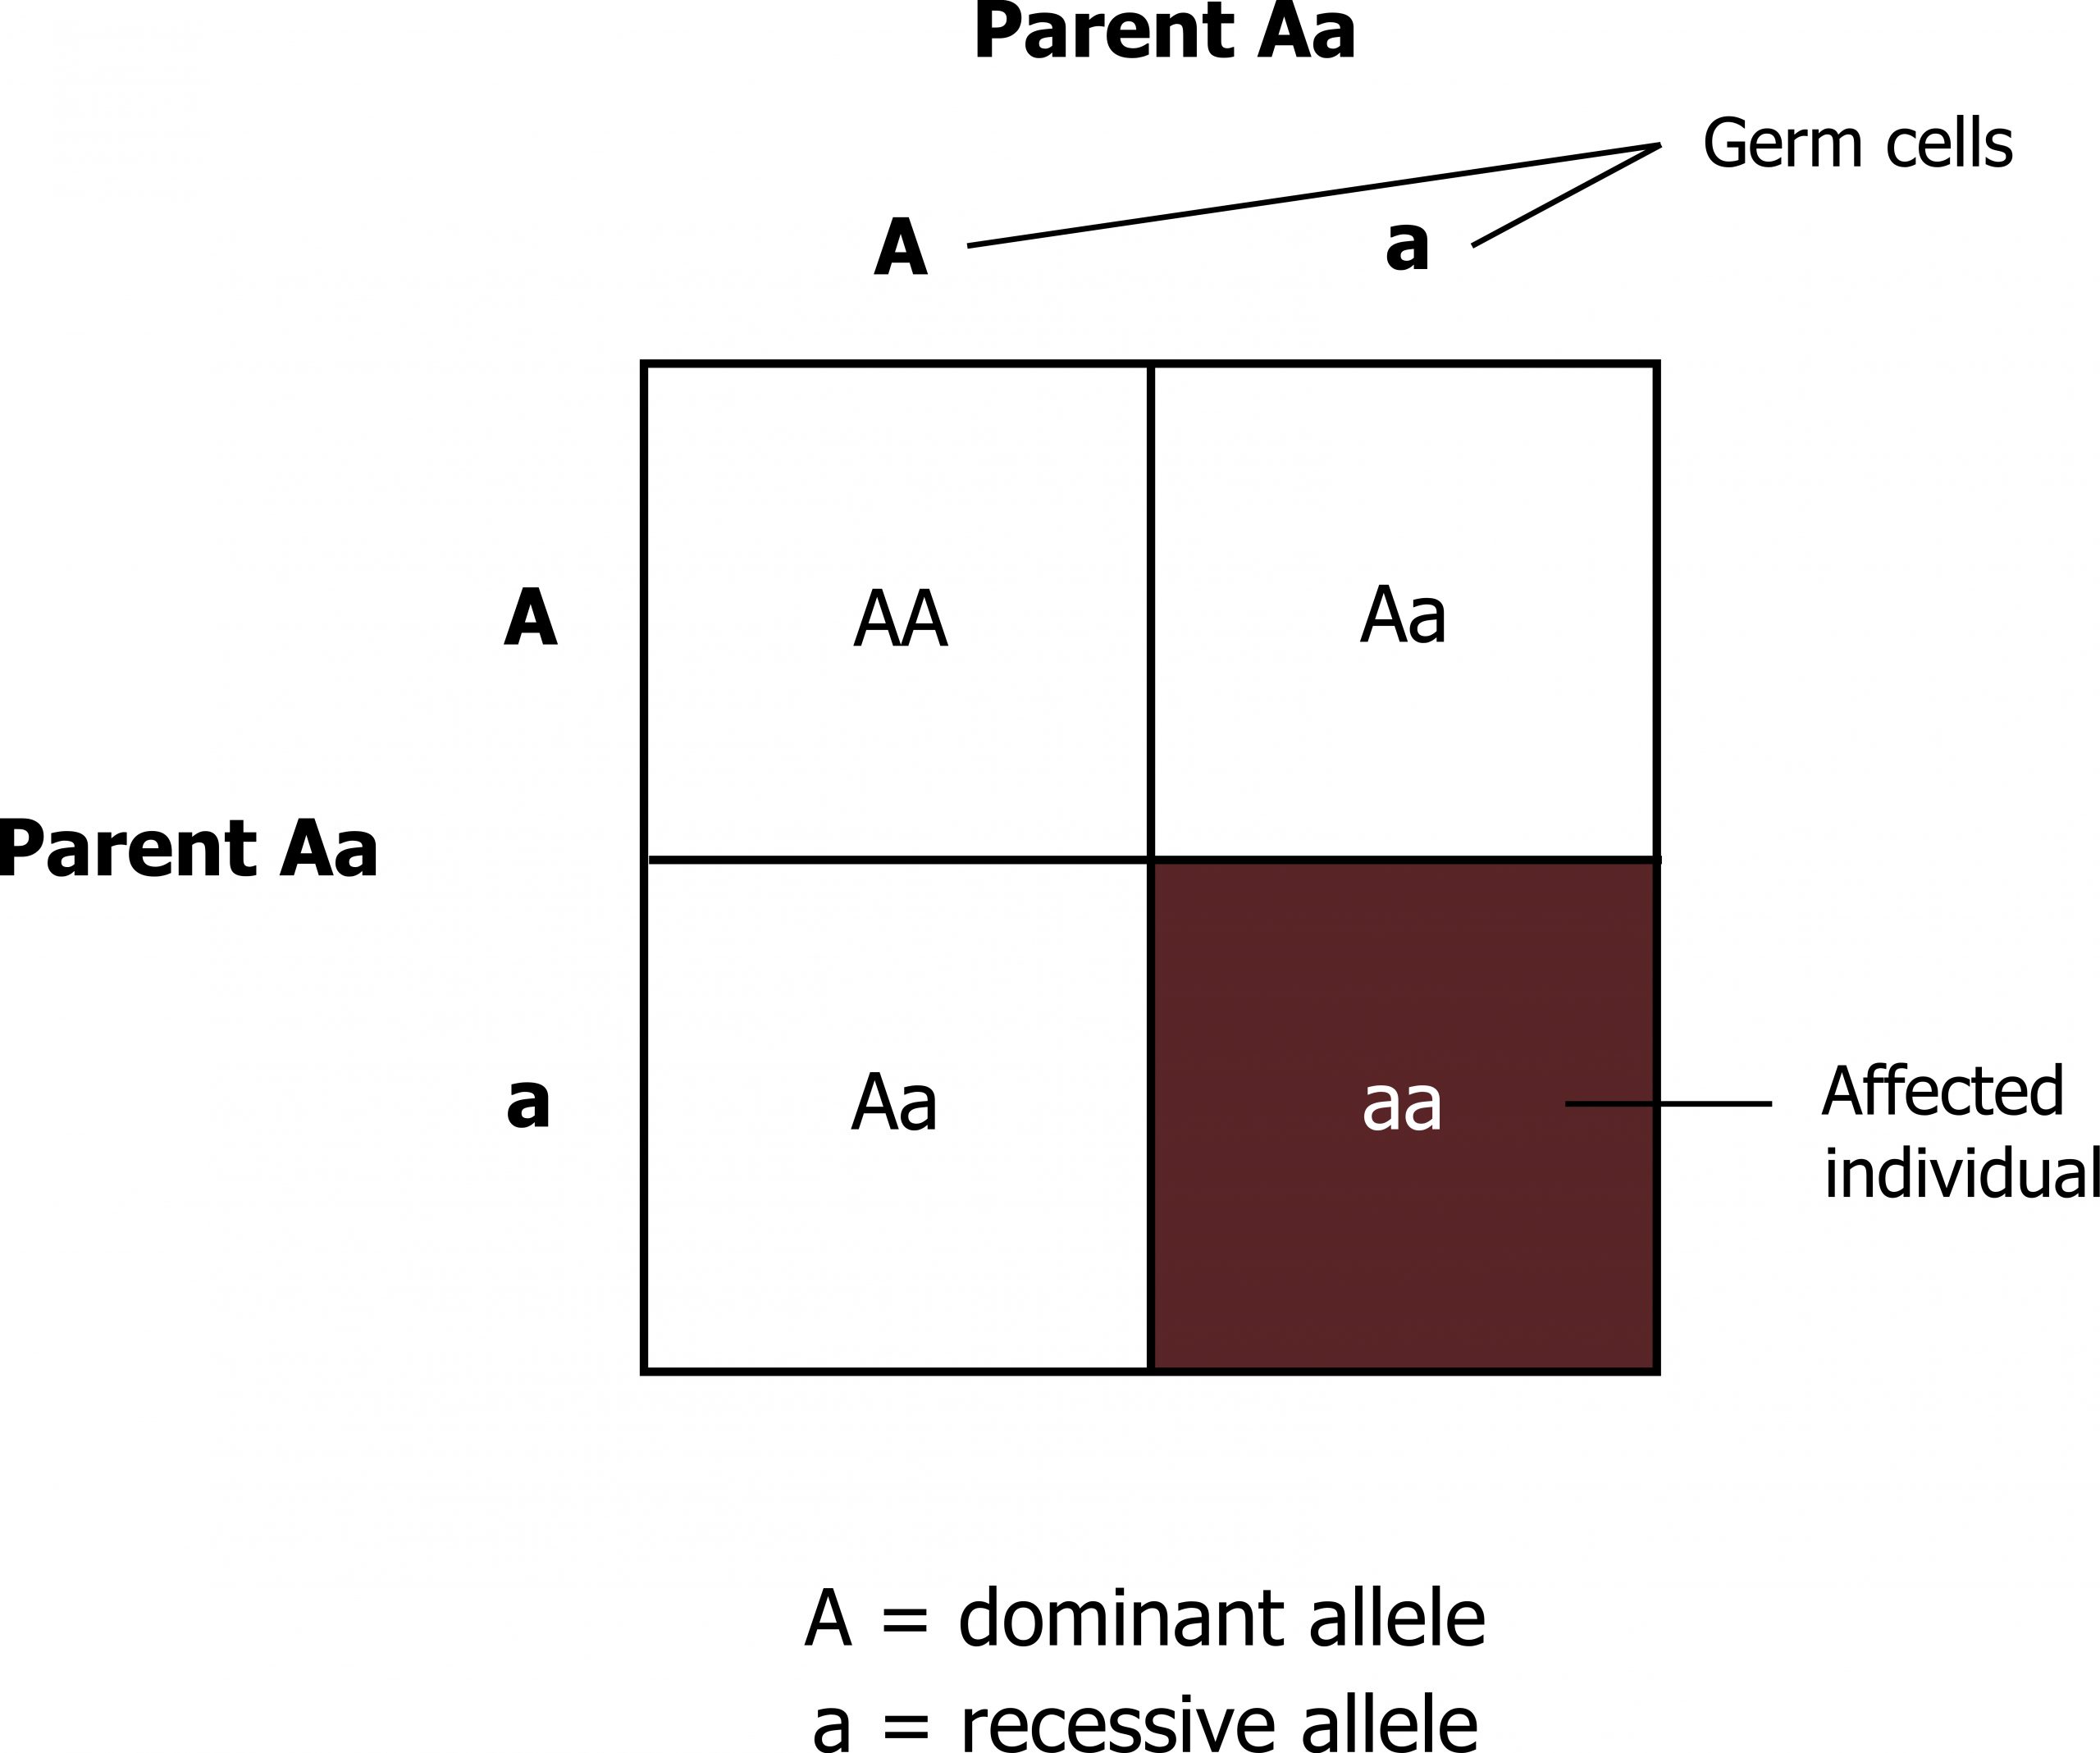 4 squares with A representing a dominant allele and a representing a recessive allele. The top is Parent Aa and the left is Parent Aa. The alleles are germ cells. Box top row: AA and Aa. Box Bottom row: Aa and aa. The affected individual has aa.